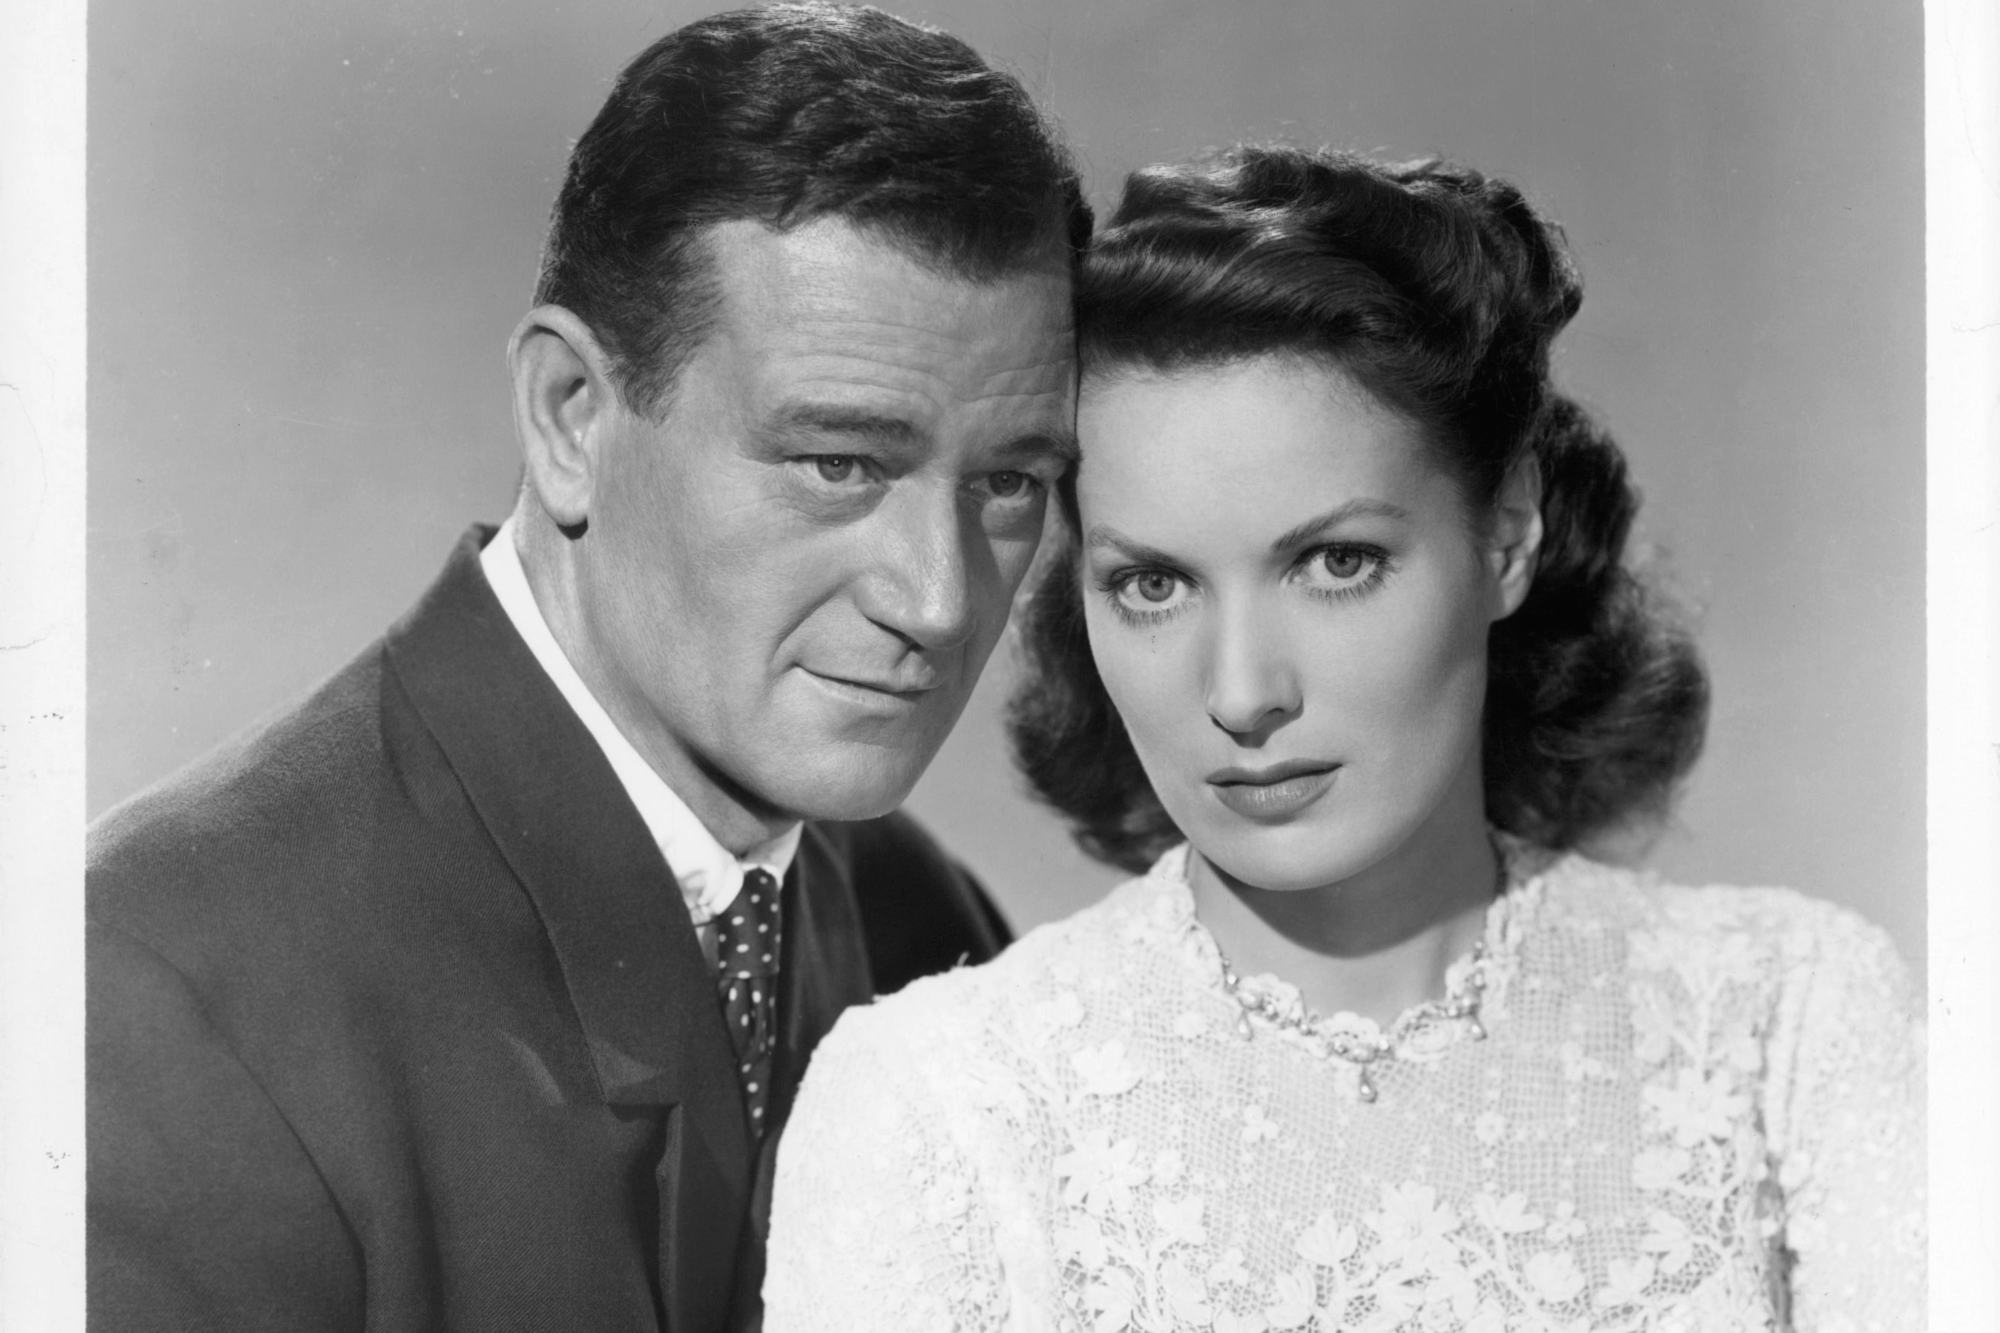 'The Quiet Man' John Wayne and Maureen O'Hara in a promotional black-and-white photo, with their heads touching